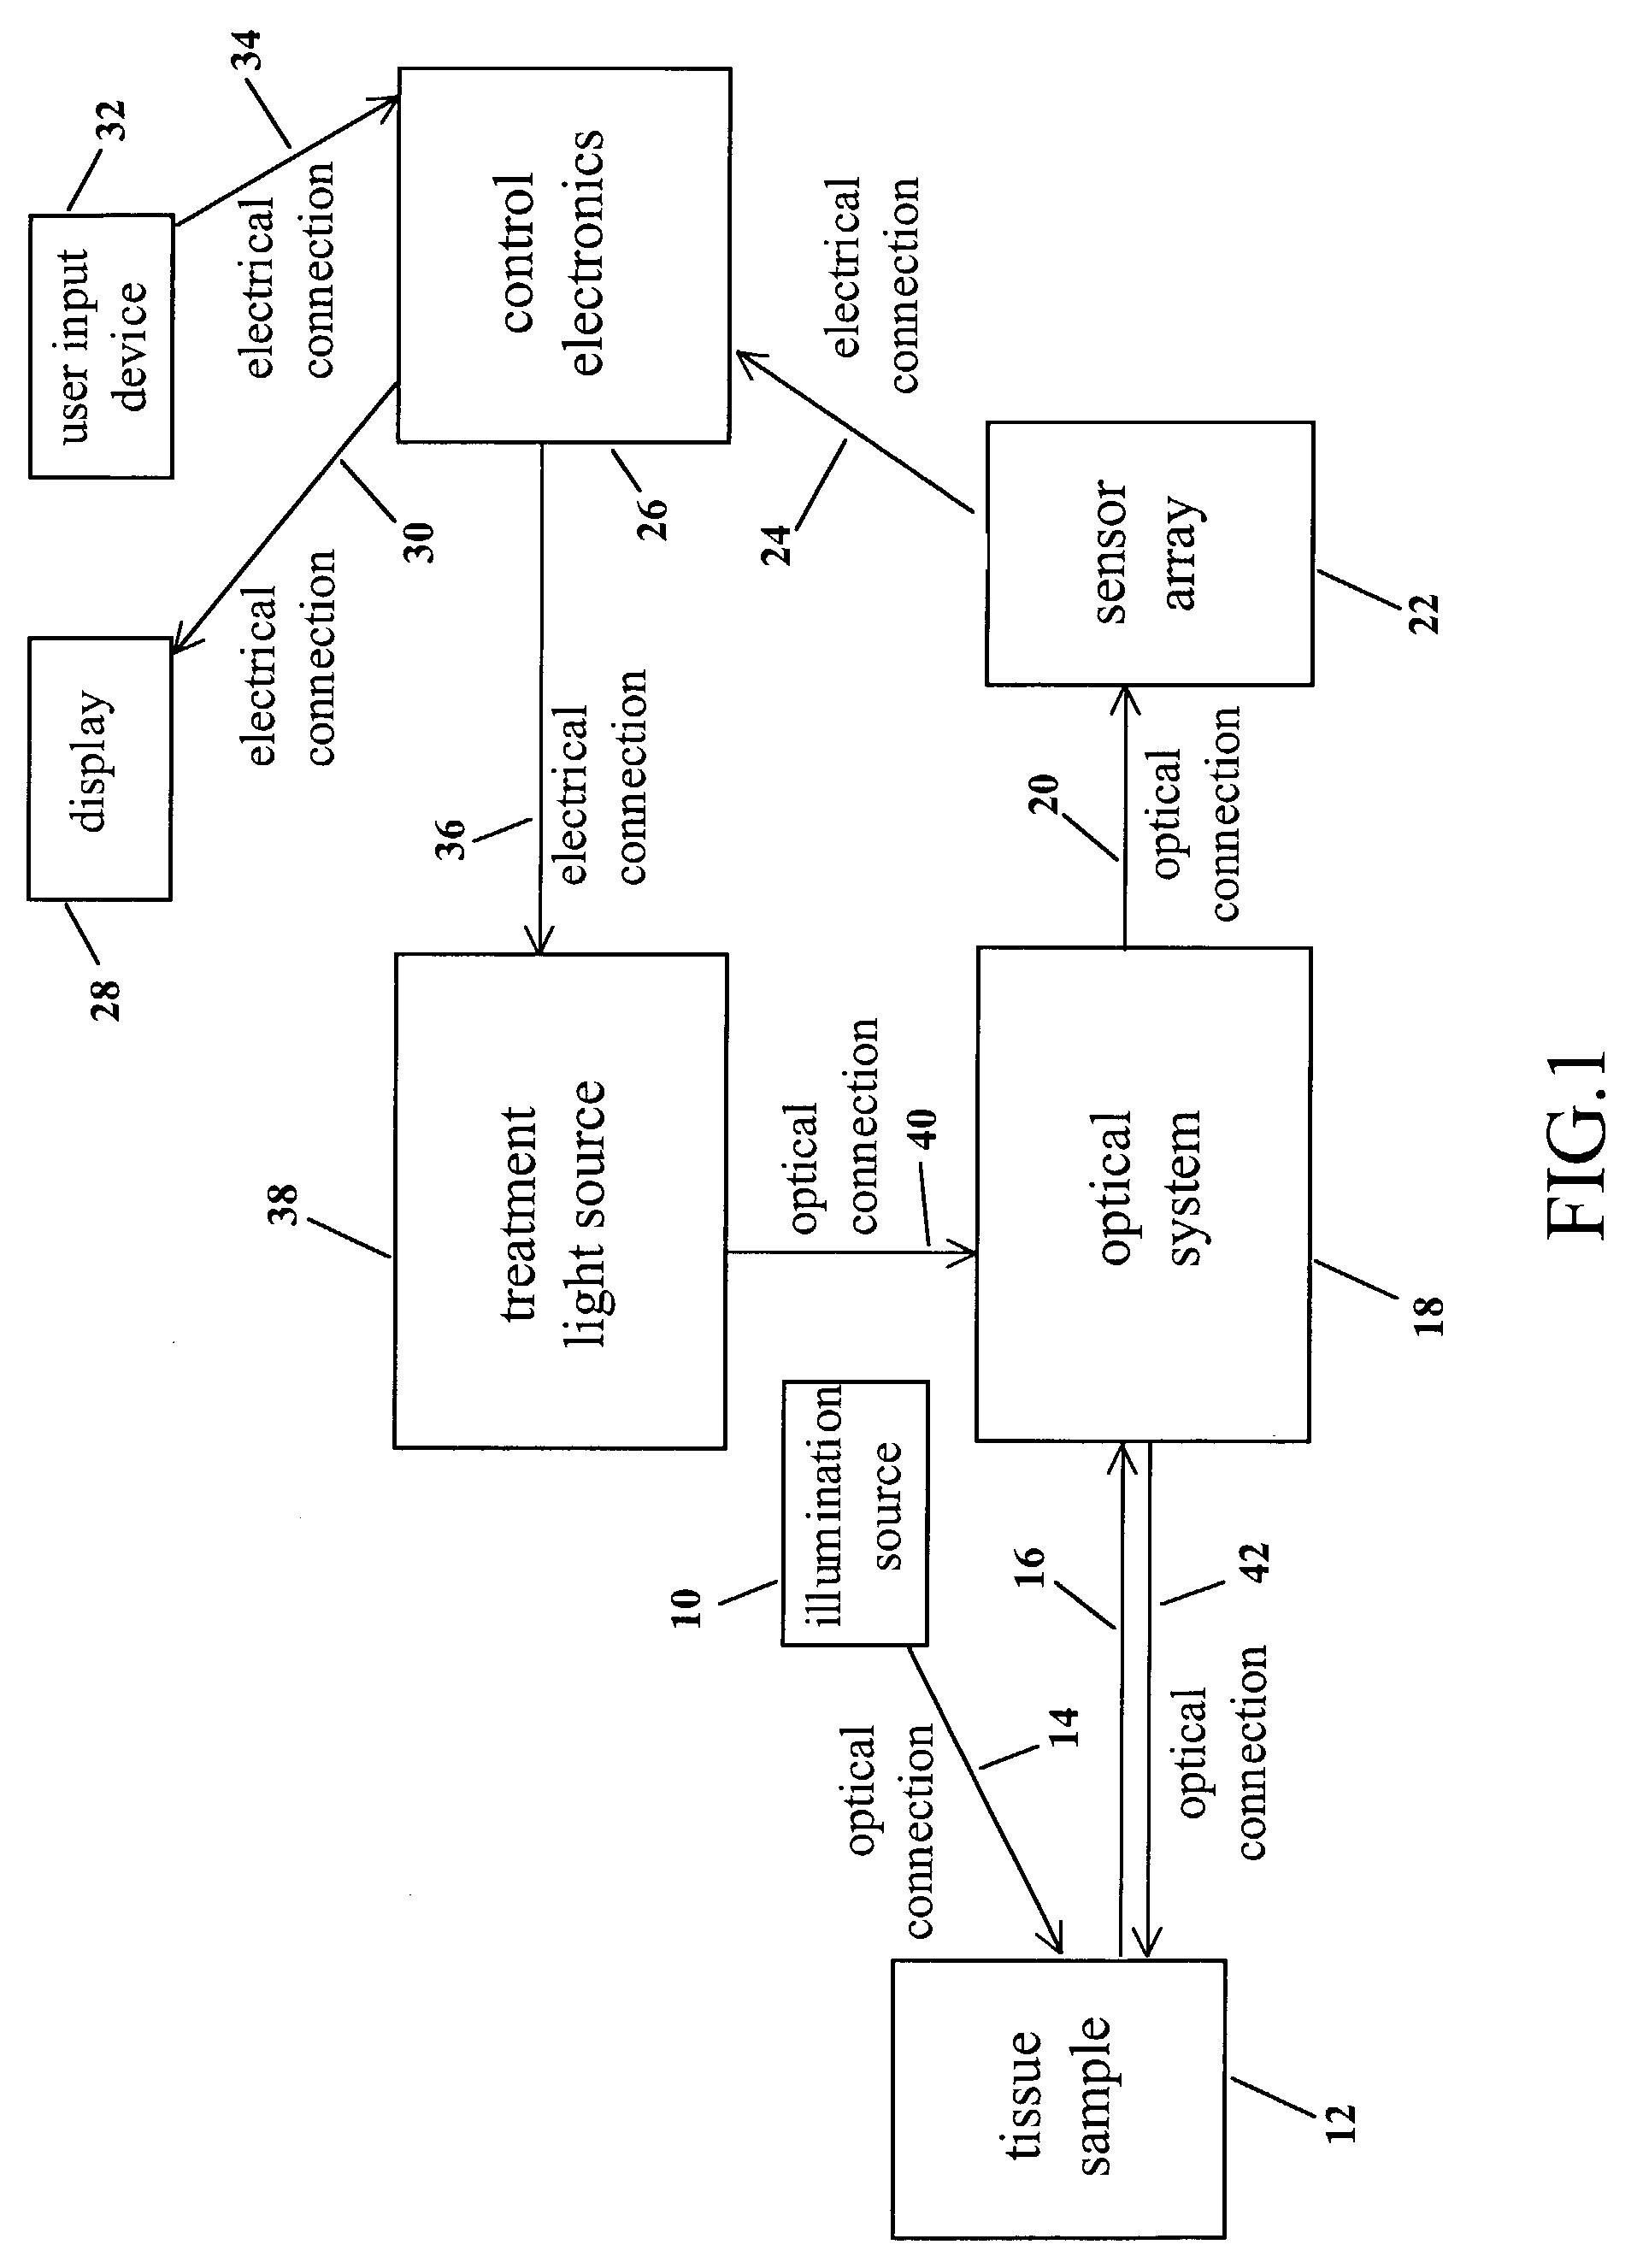 Cancer detection and adaptive dose optimization treatment system